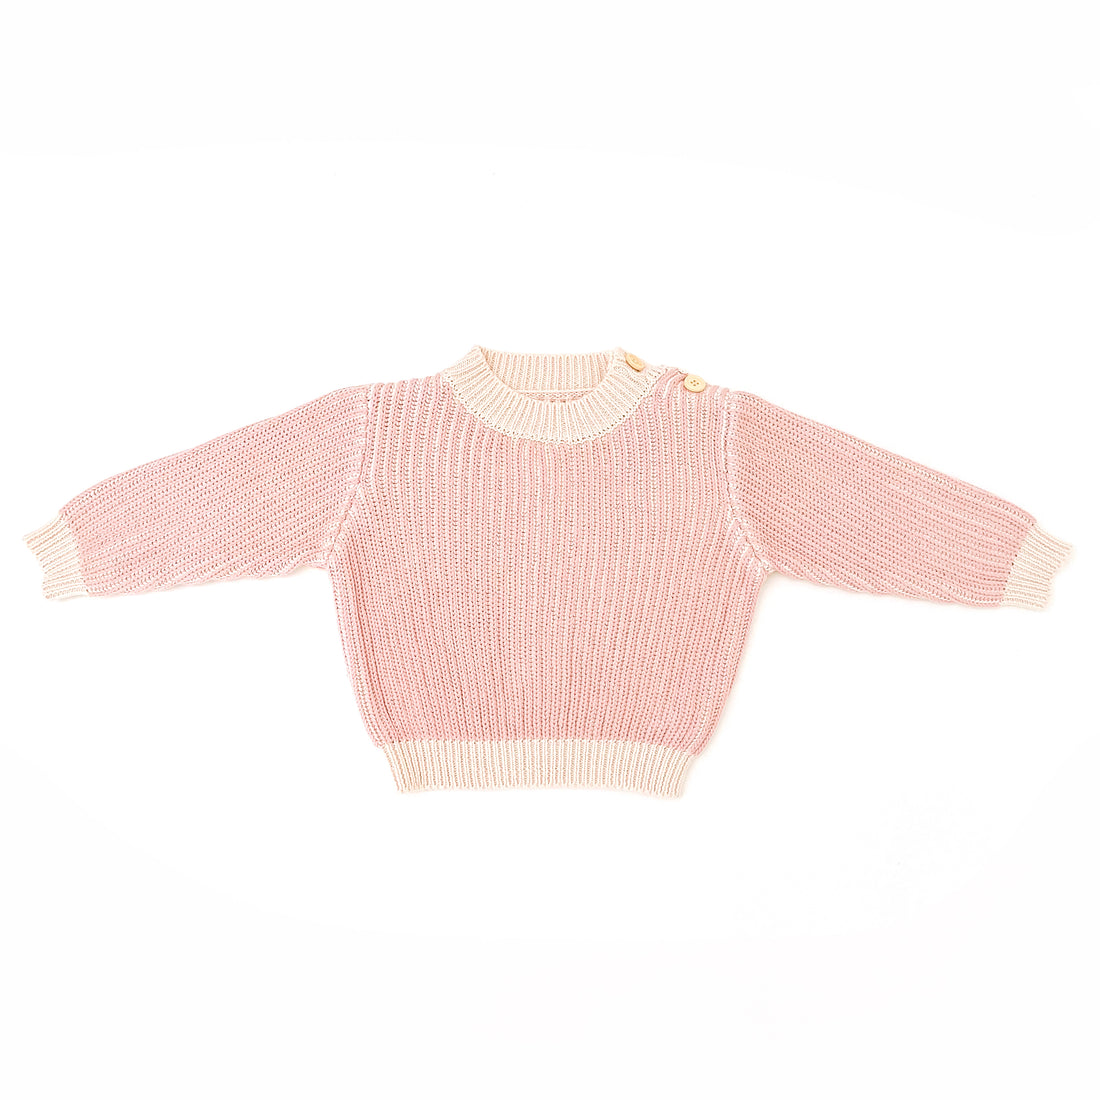 Striped Knitted Jumper - CREAM/DUSTY PINK